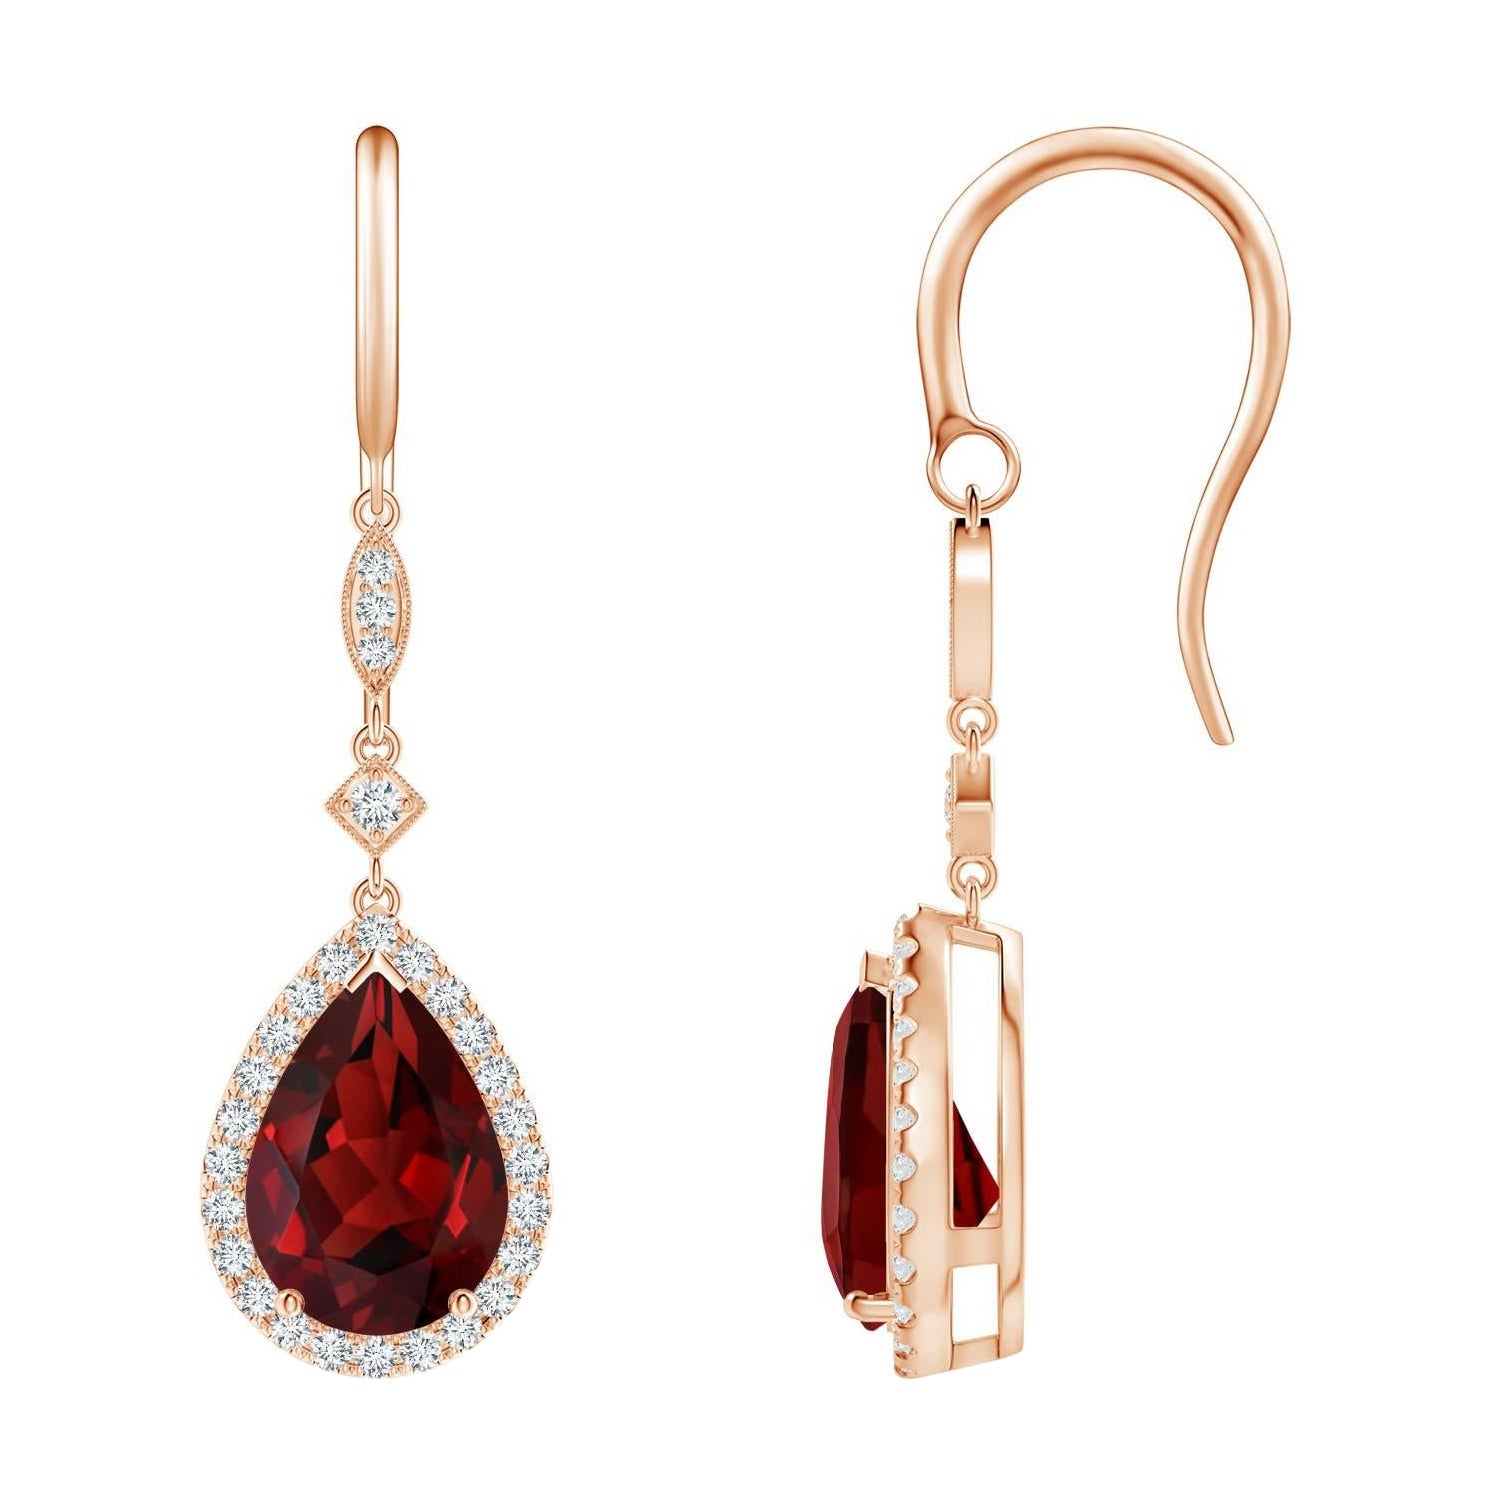 Natural Pear-Shaped 4.2ct Garnet Drop Earrings with Diamond in 14K Rose Gold For Sale